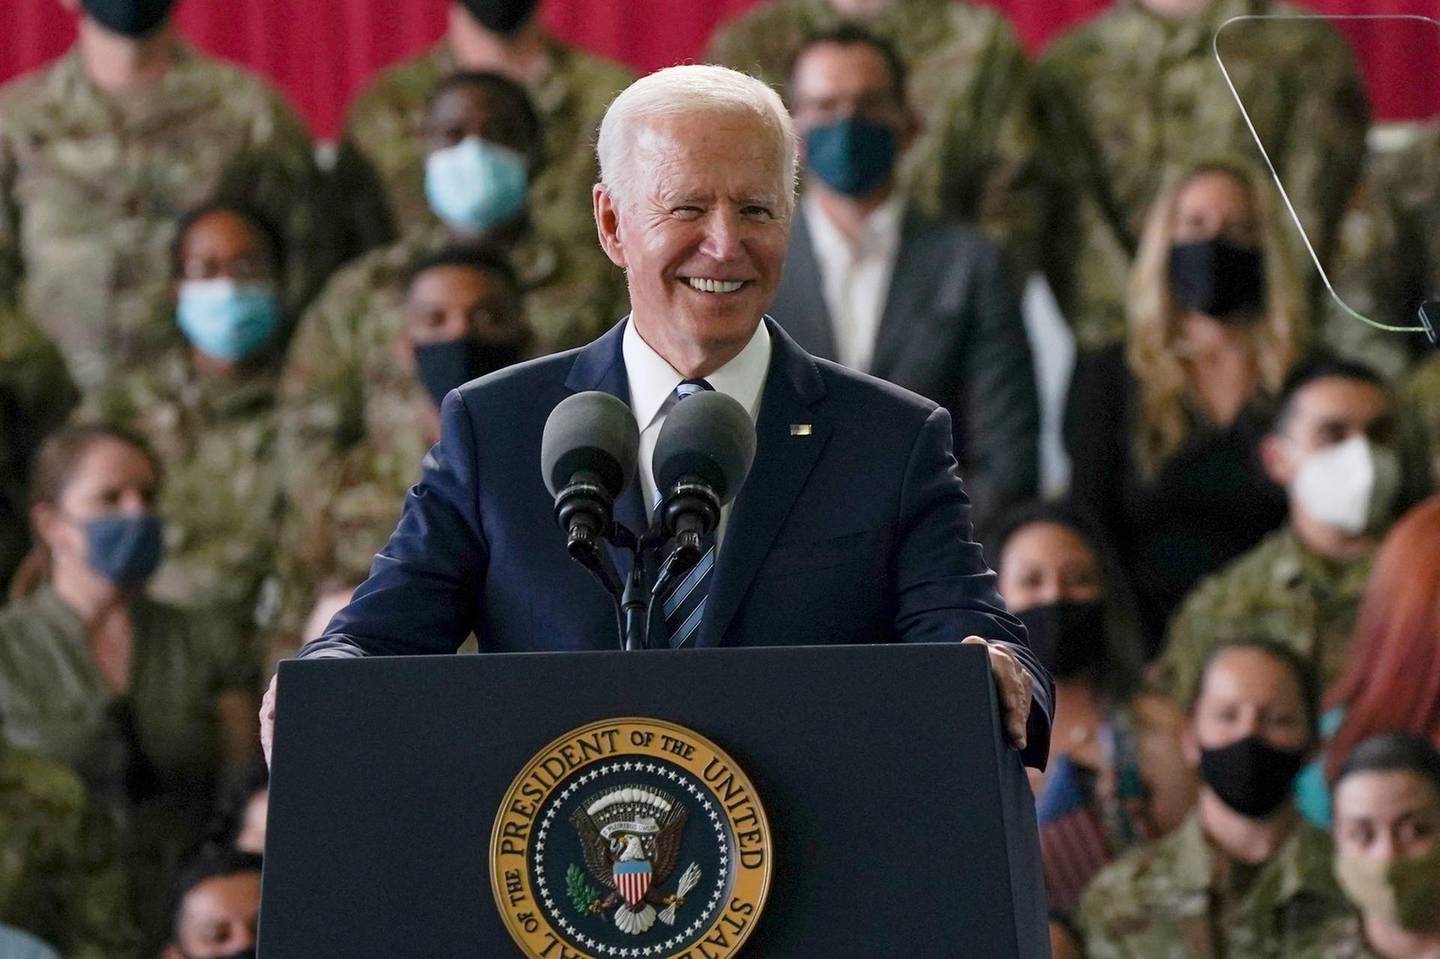 MILDENHALL, ENGLAND - JUNE 09: (Alternate crop pf #1233361258) US President Joe Biden addresses US Air Force personnel at RAF Mildenhall in Suffolk, ahead of the G7 summit in Cornwall, on June 9, 2021 in Mildenhall, England. On June 11, Prime Minister Boris Johnson will host the Group of Seven leaders at a three-day summit in Cornwall, as the wealthiest nations look to chart a course for recovery from the global pandemic. (Photo by Joe Giddens - WPA Pool/Getty Images)